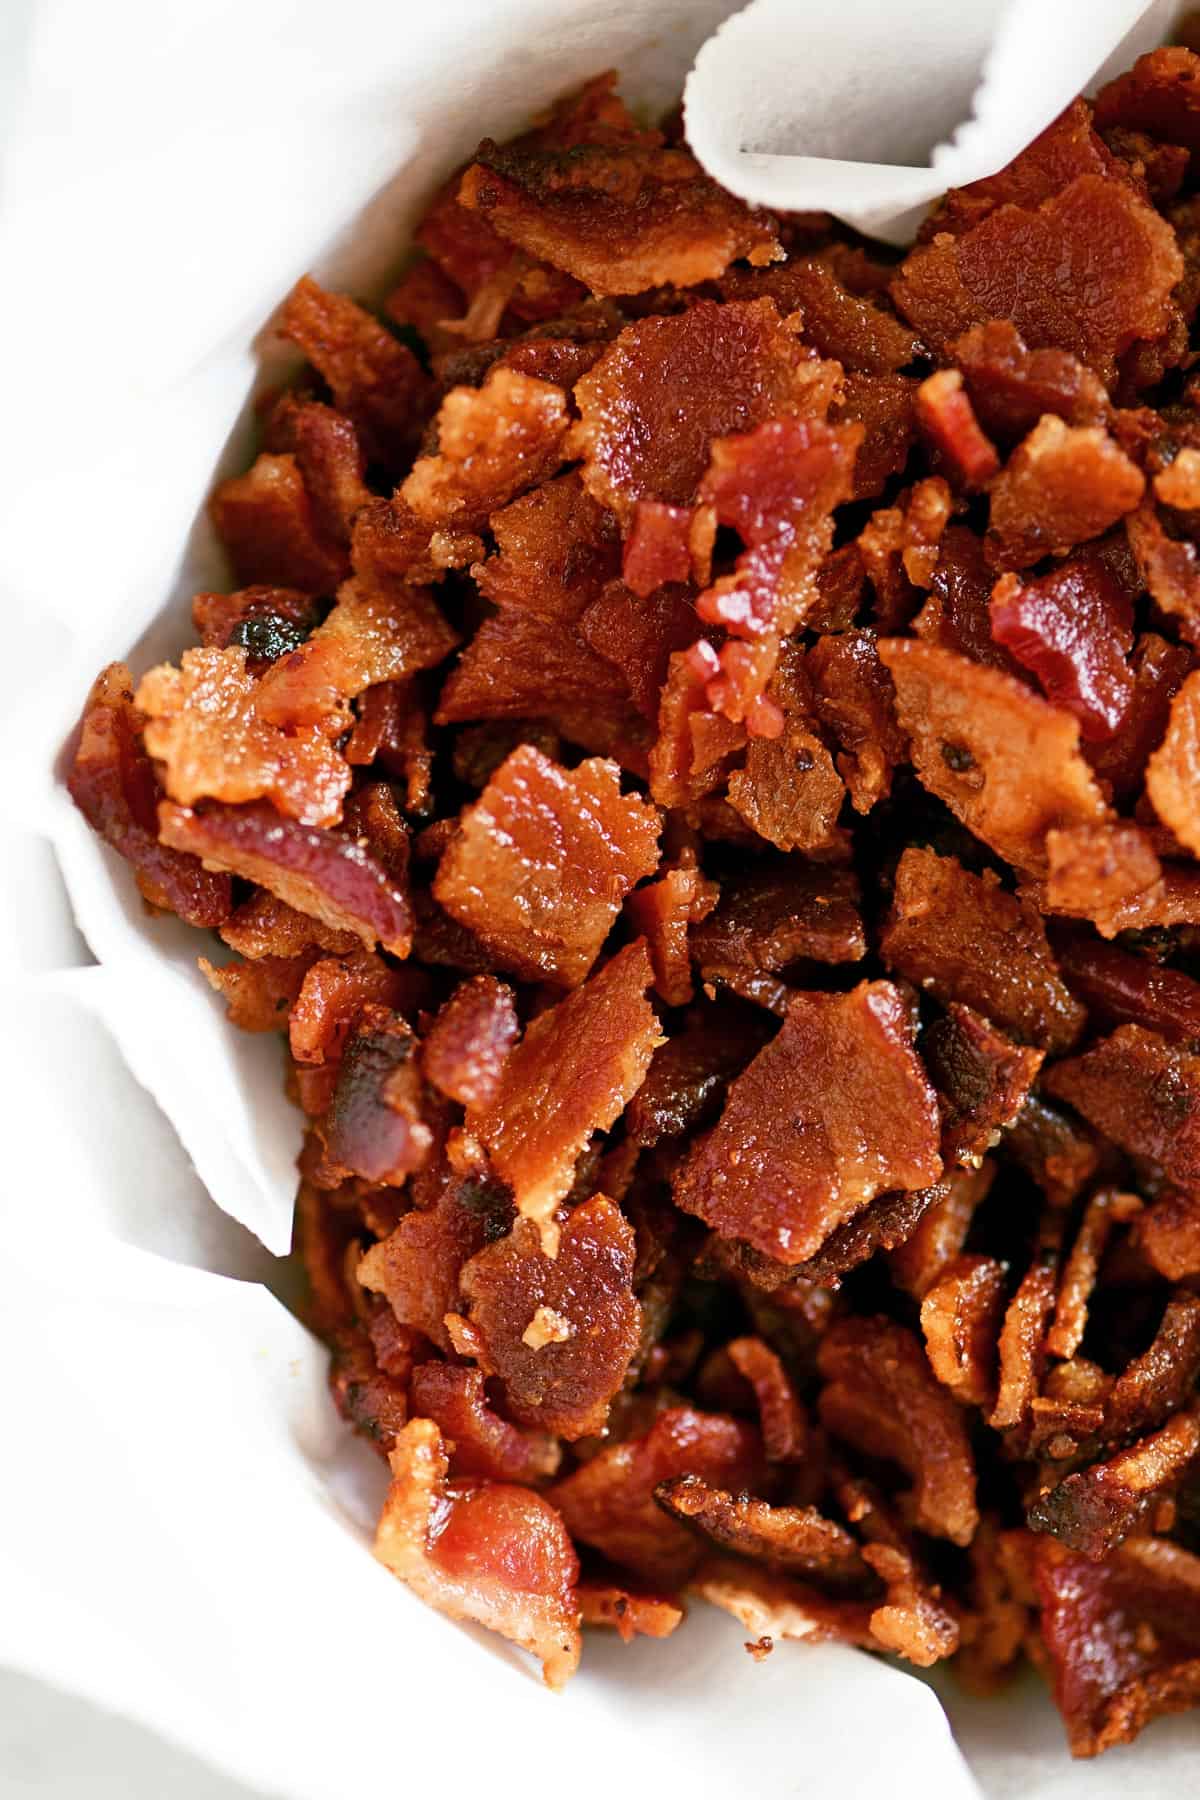 Crumbled bacon in a parchment-lined bowl.